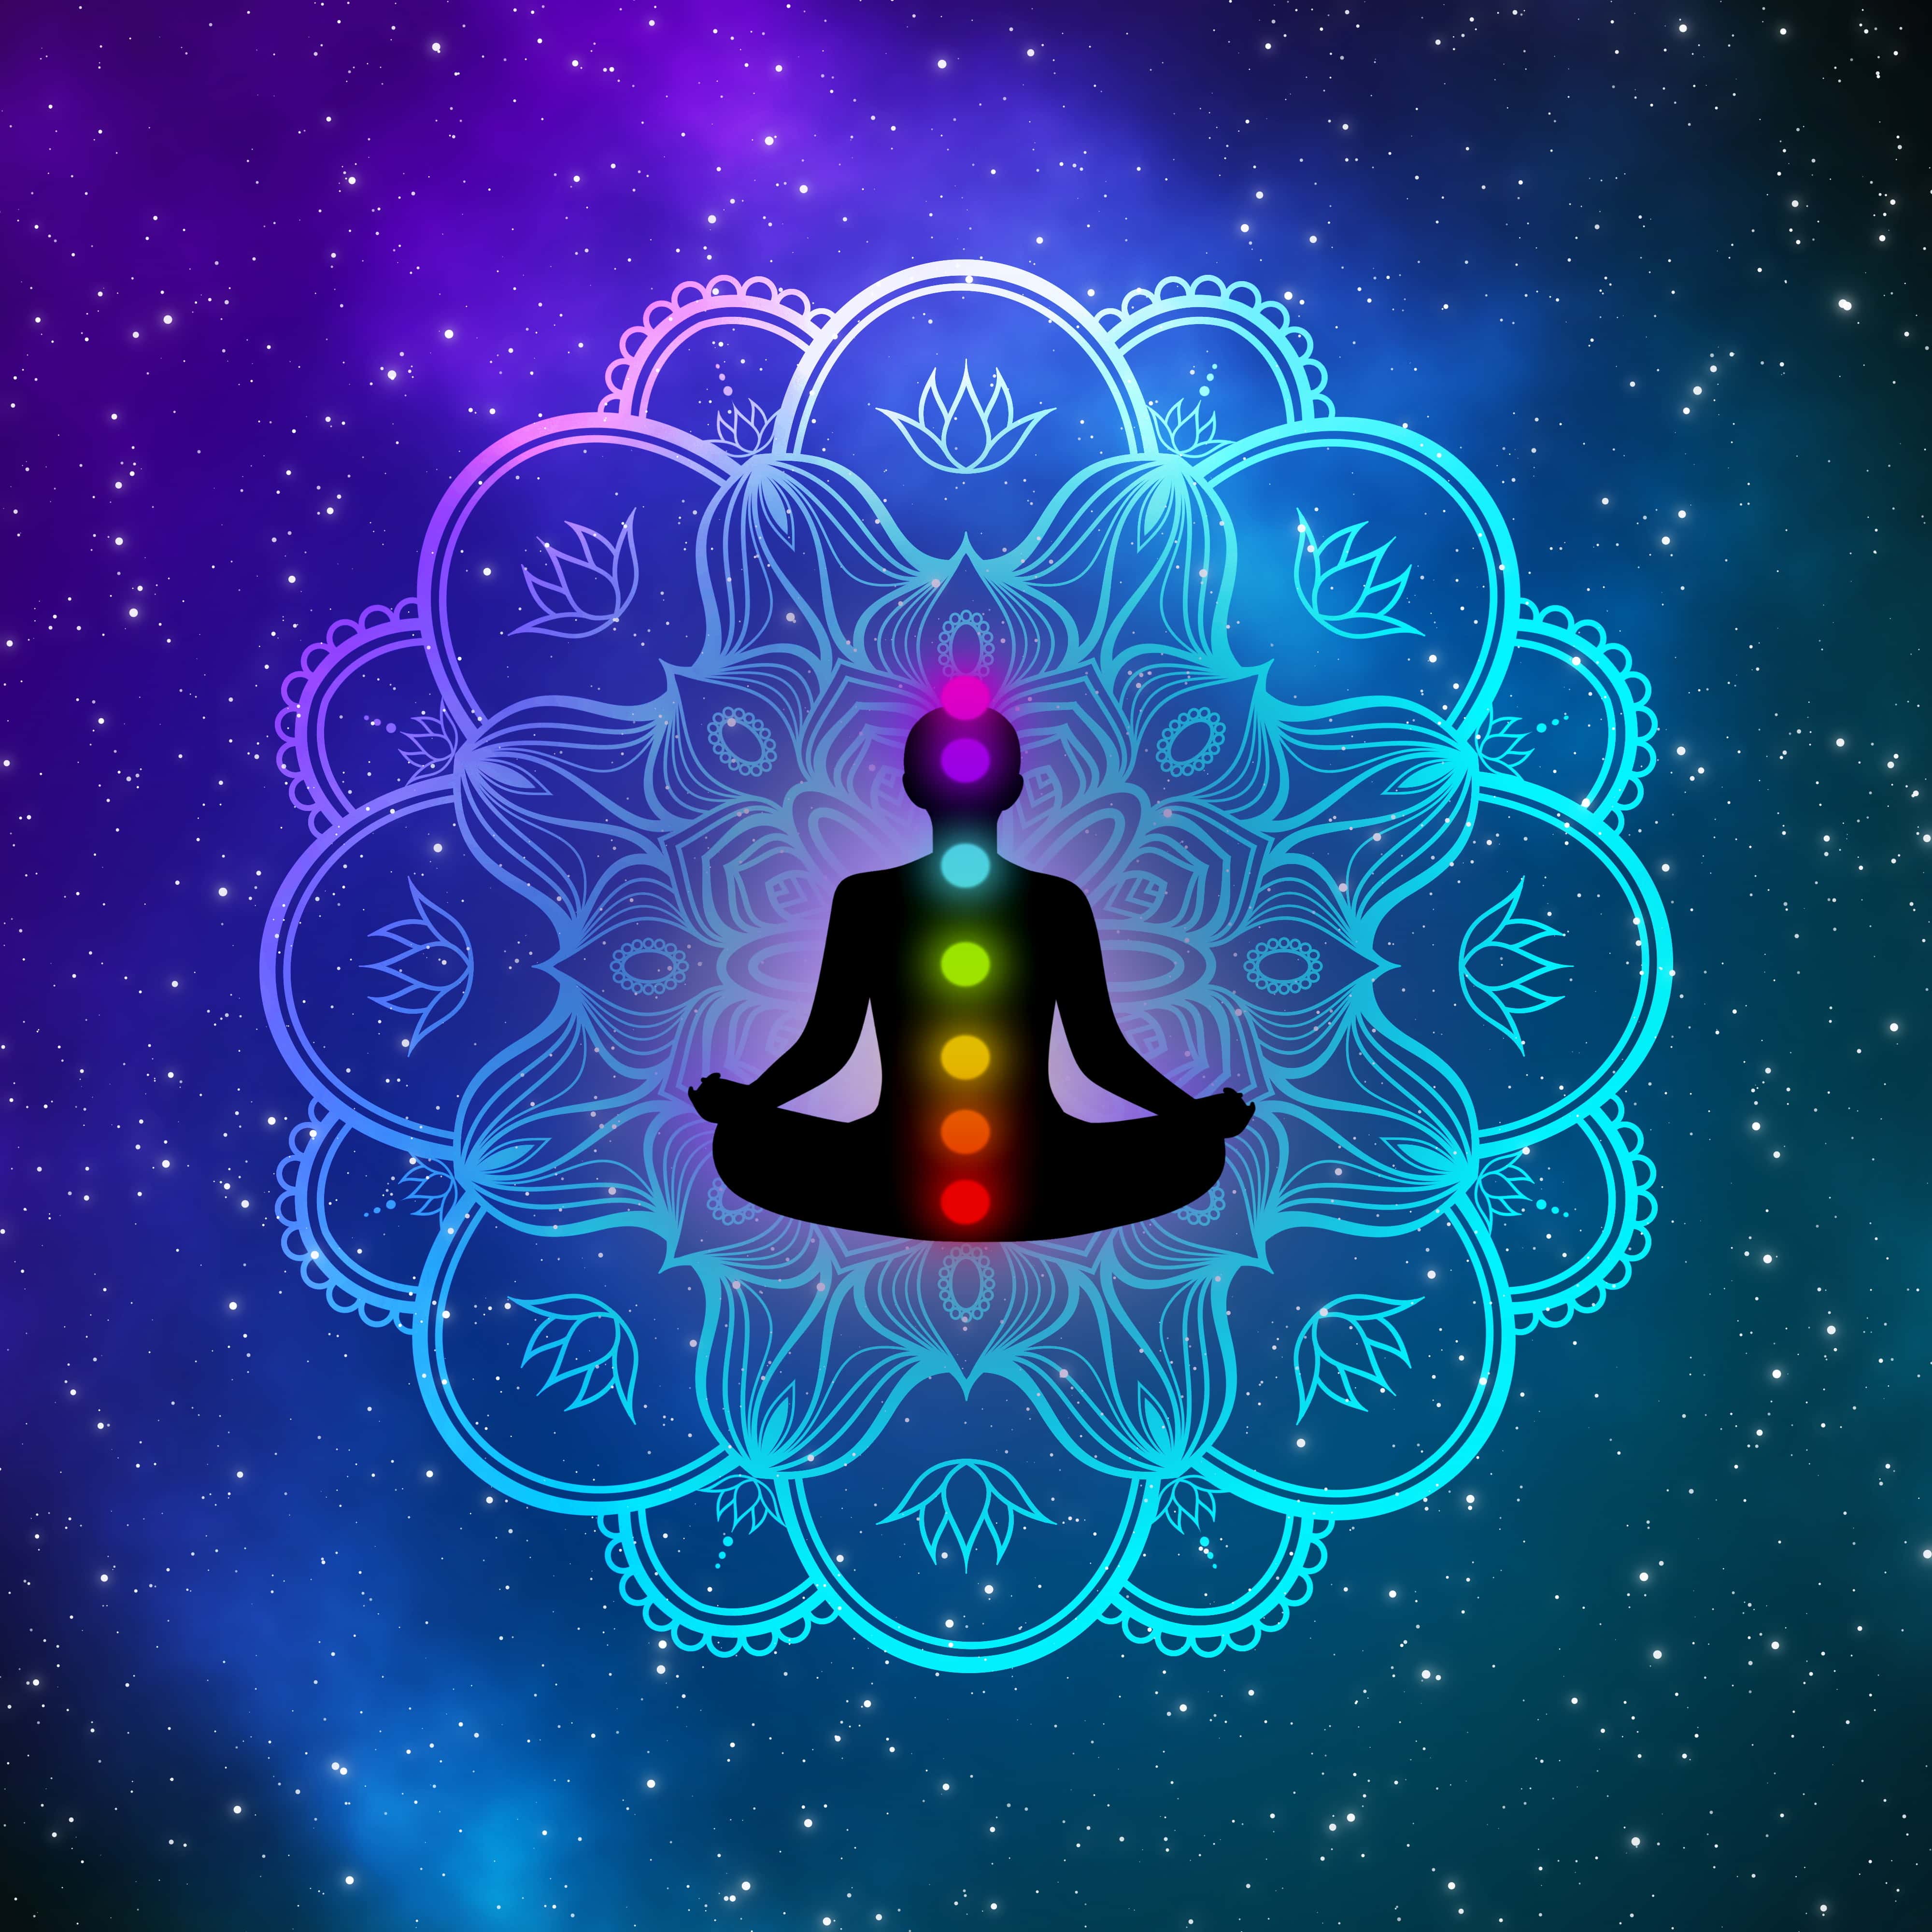 A silhouette of a person sitting with the chakras symbols overlapping them.